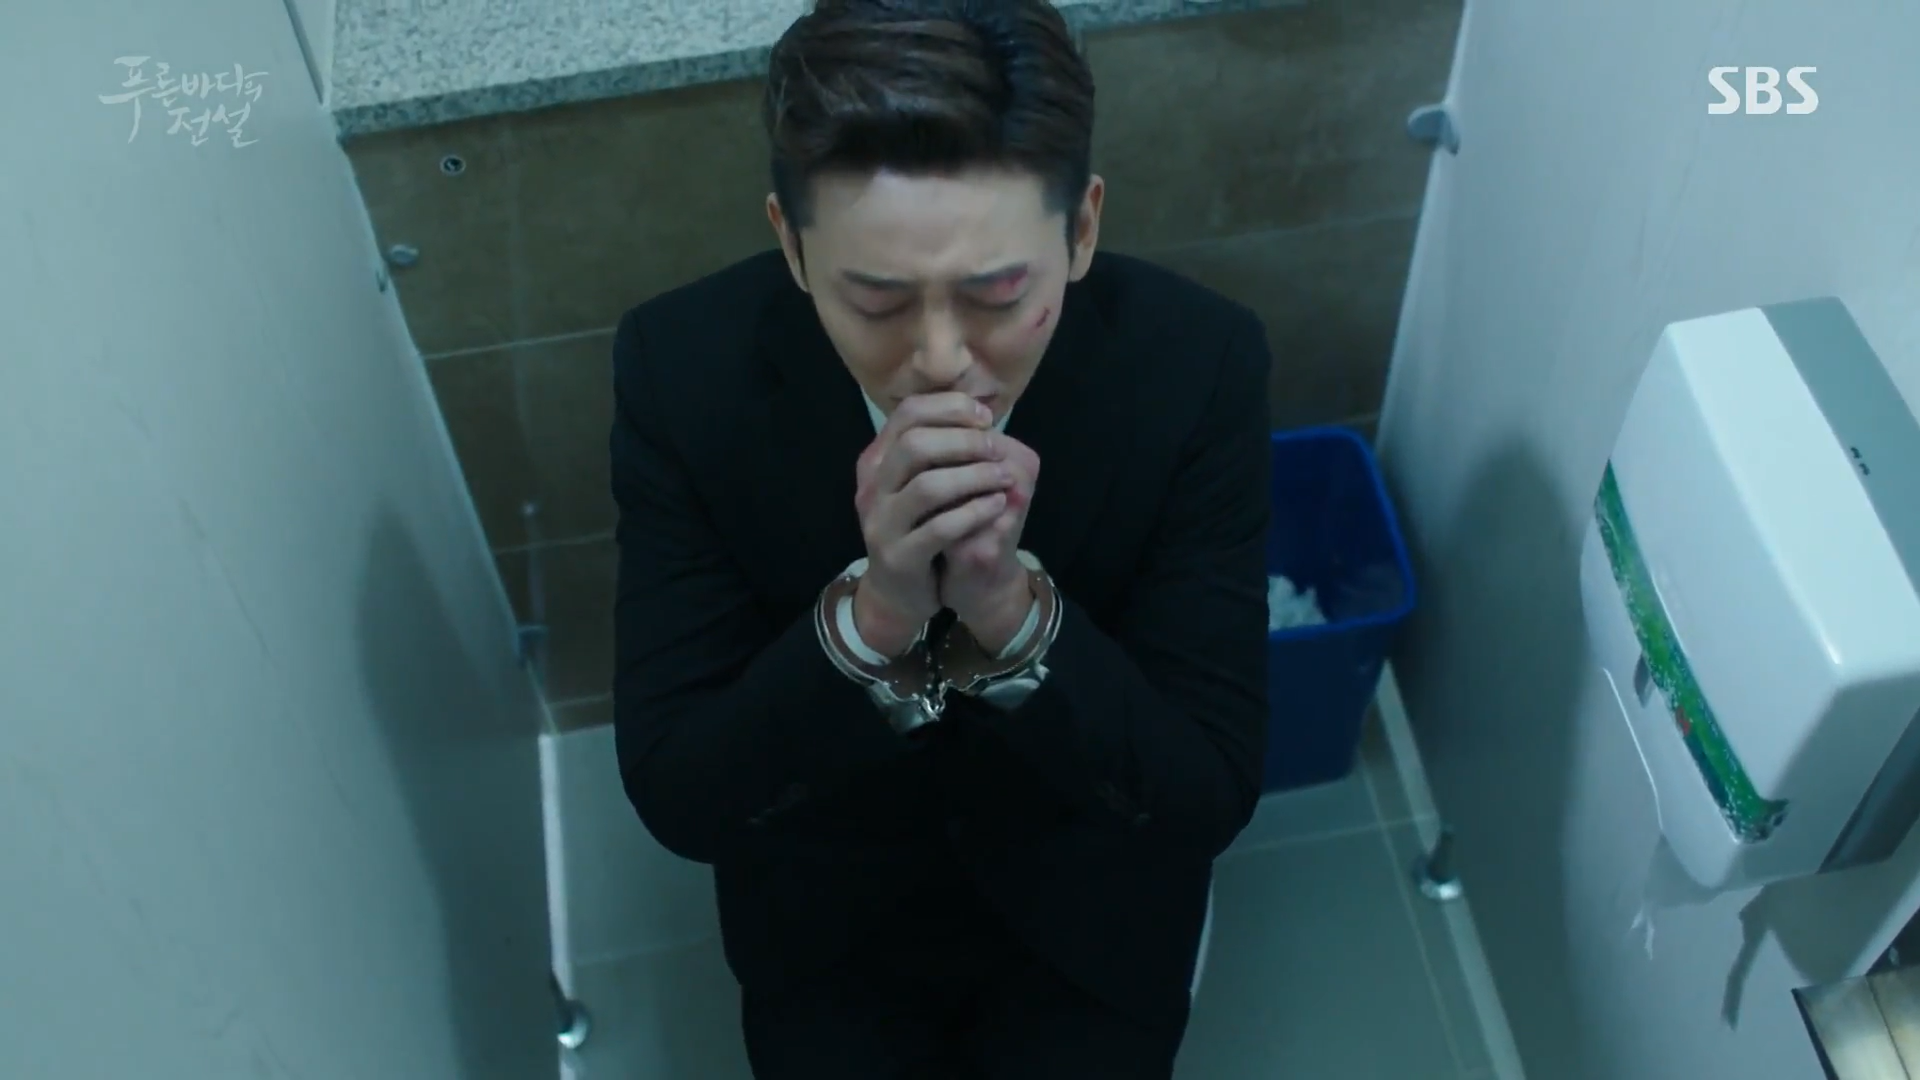 Chi Hyun taking the poison, committing suicide